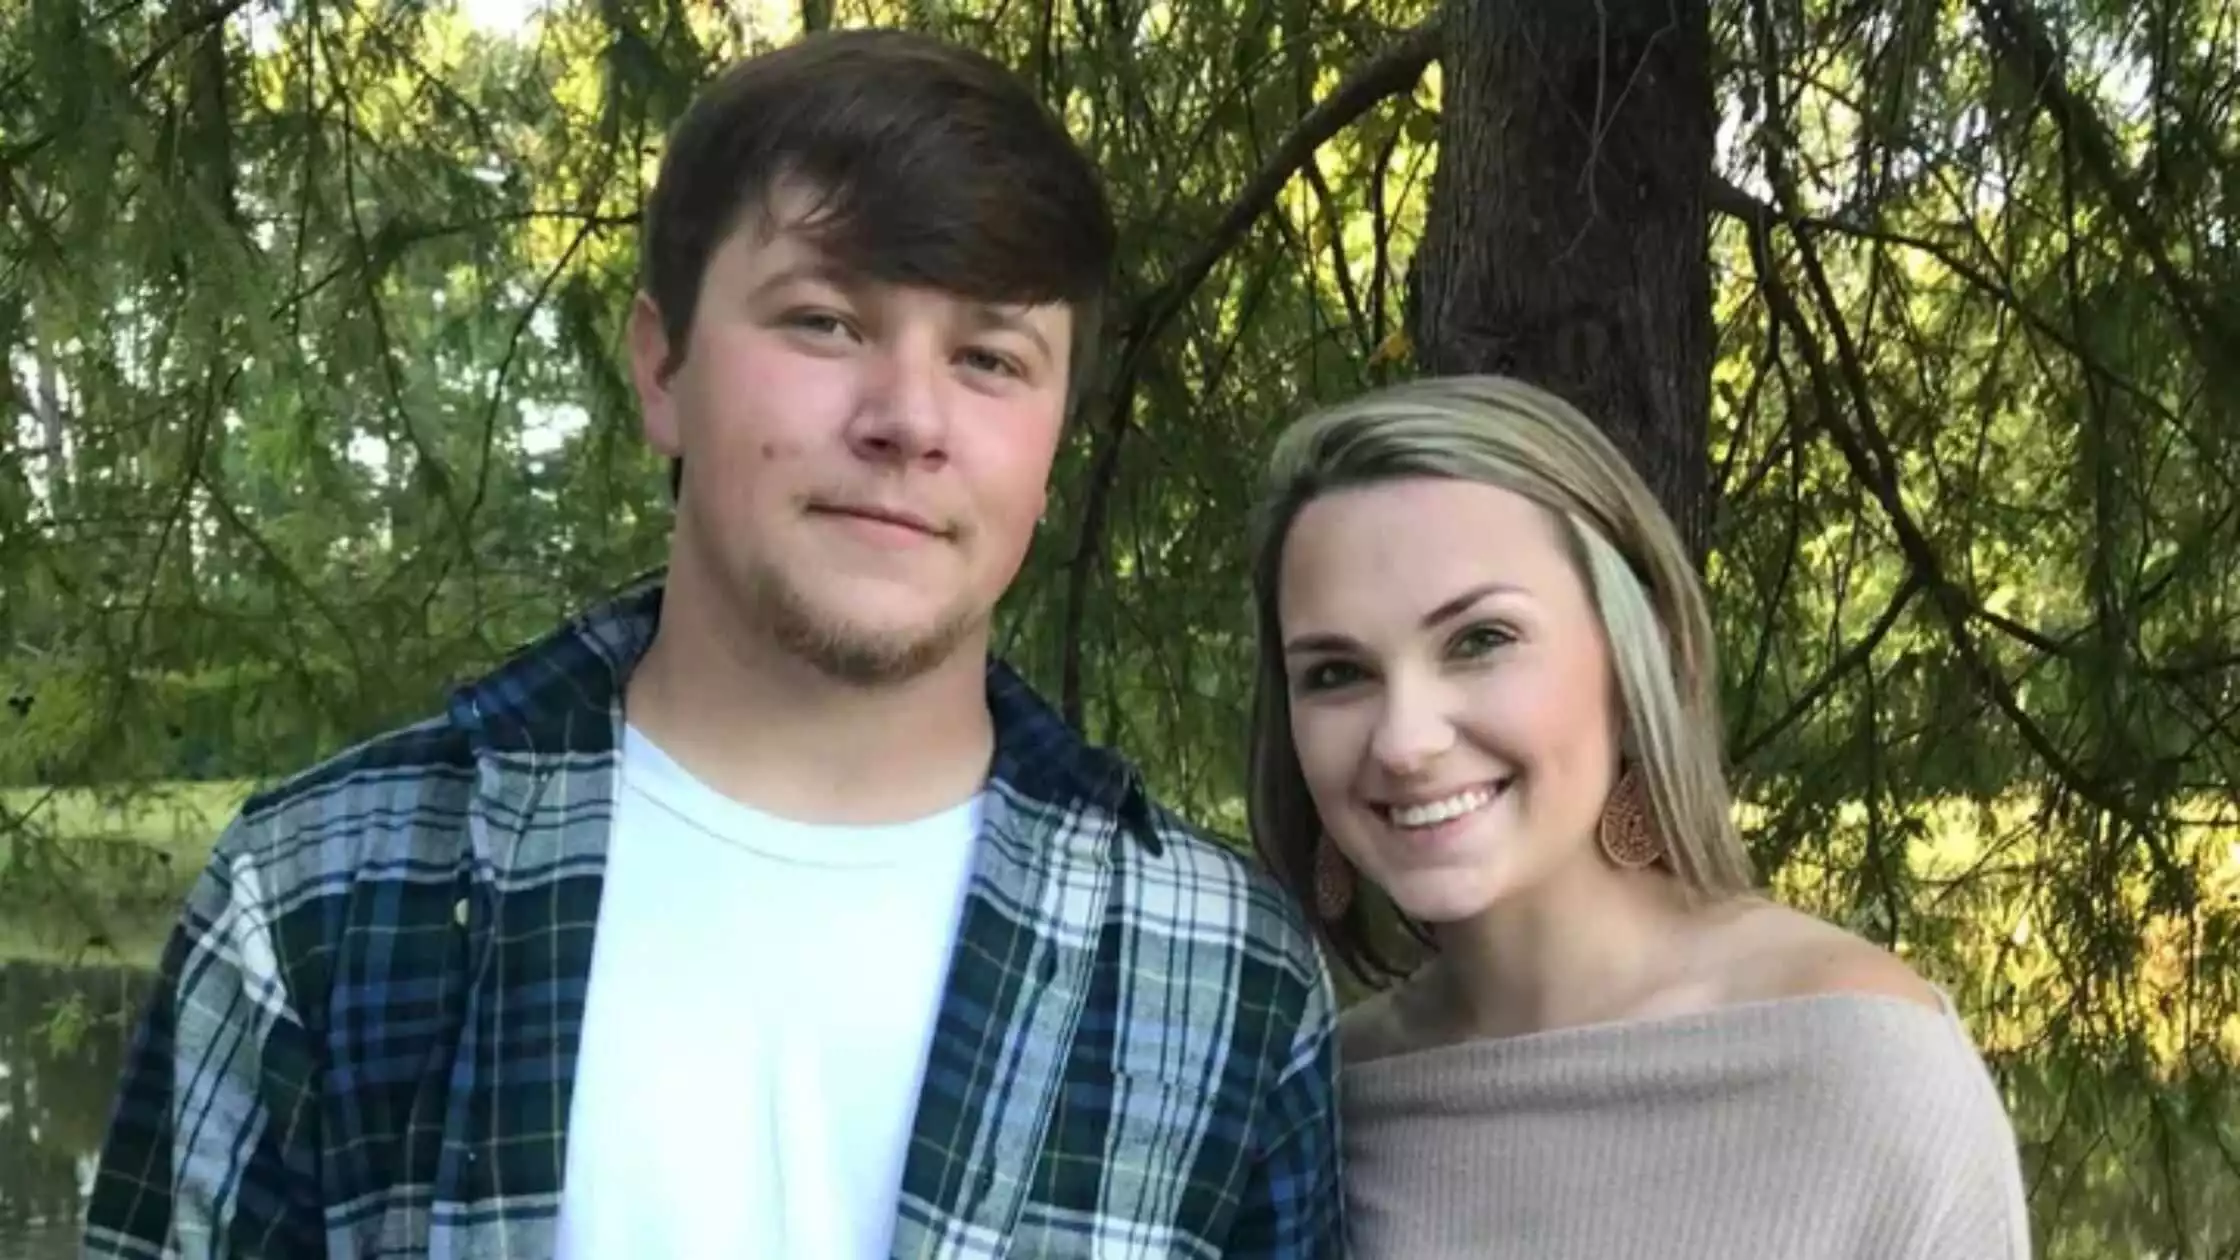 Missing South Carolina duck hunter Tyler Doyle and his wife